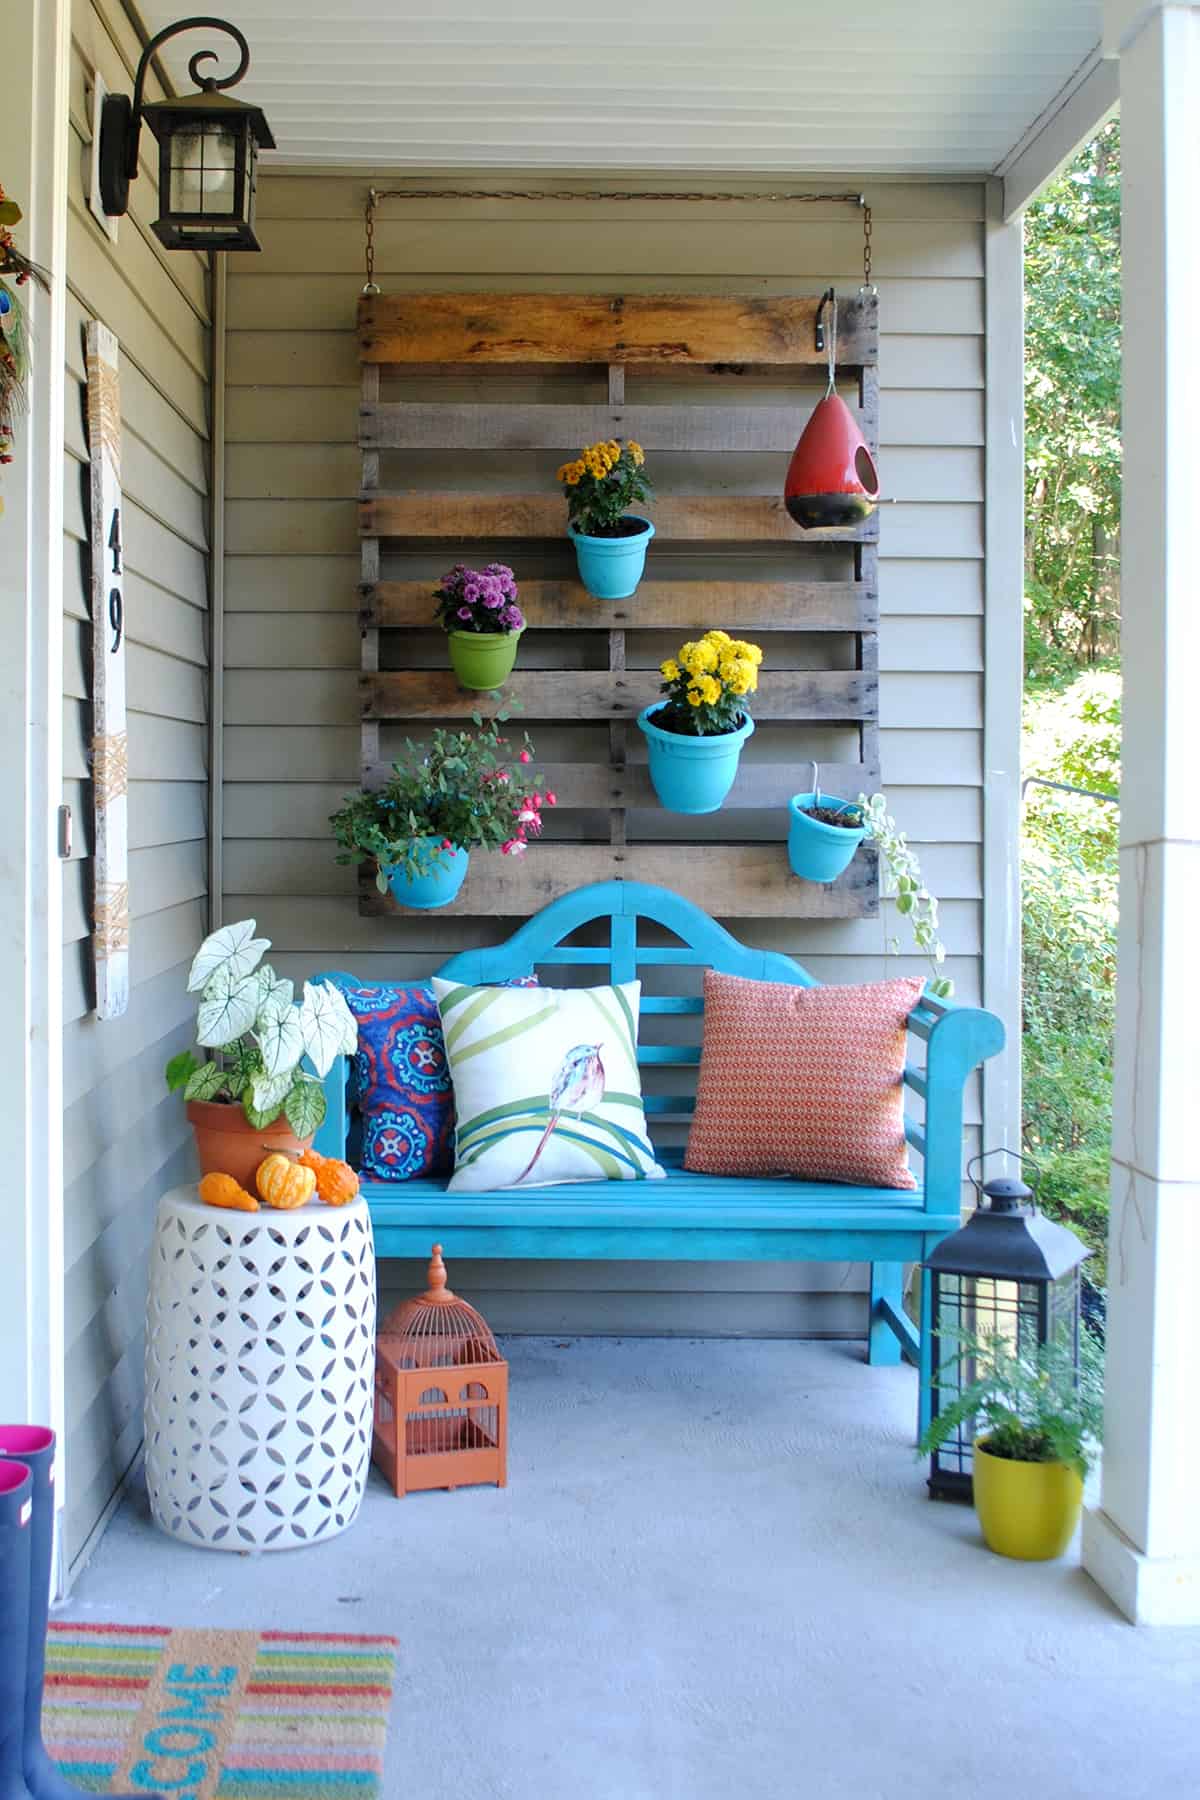 Patio with hanging garden wall made from plants and a wood pallet.